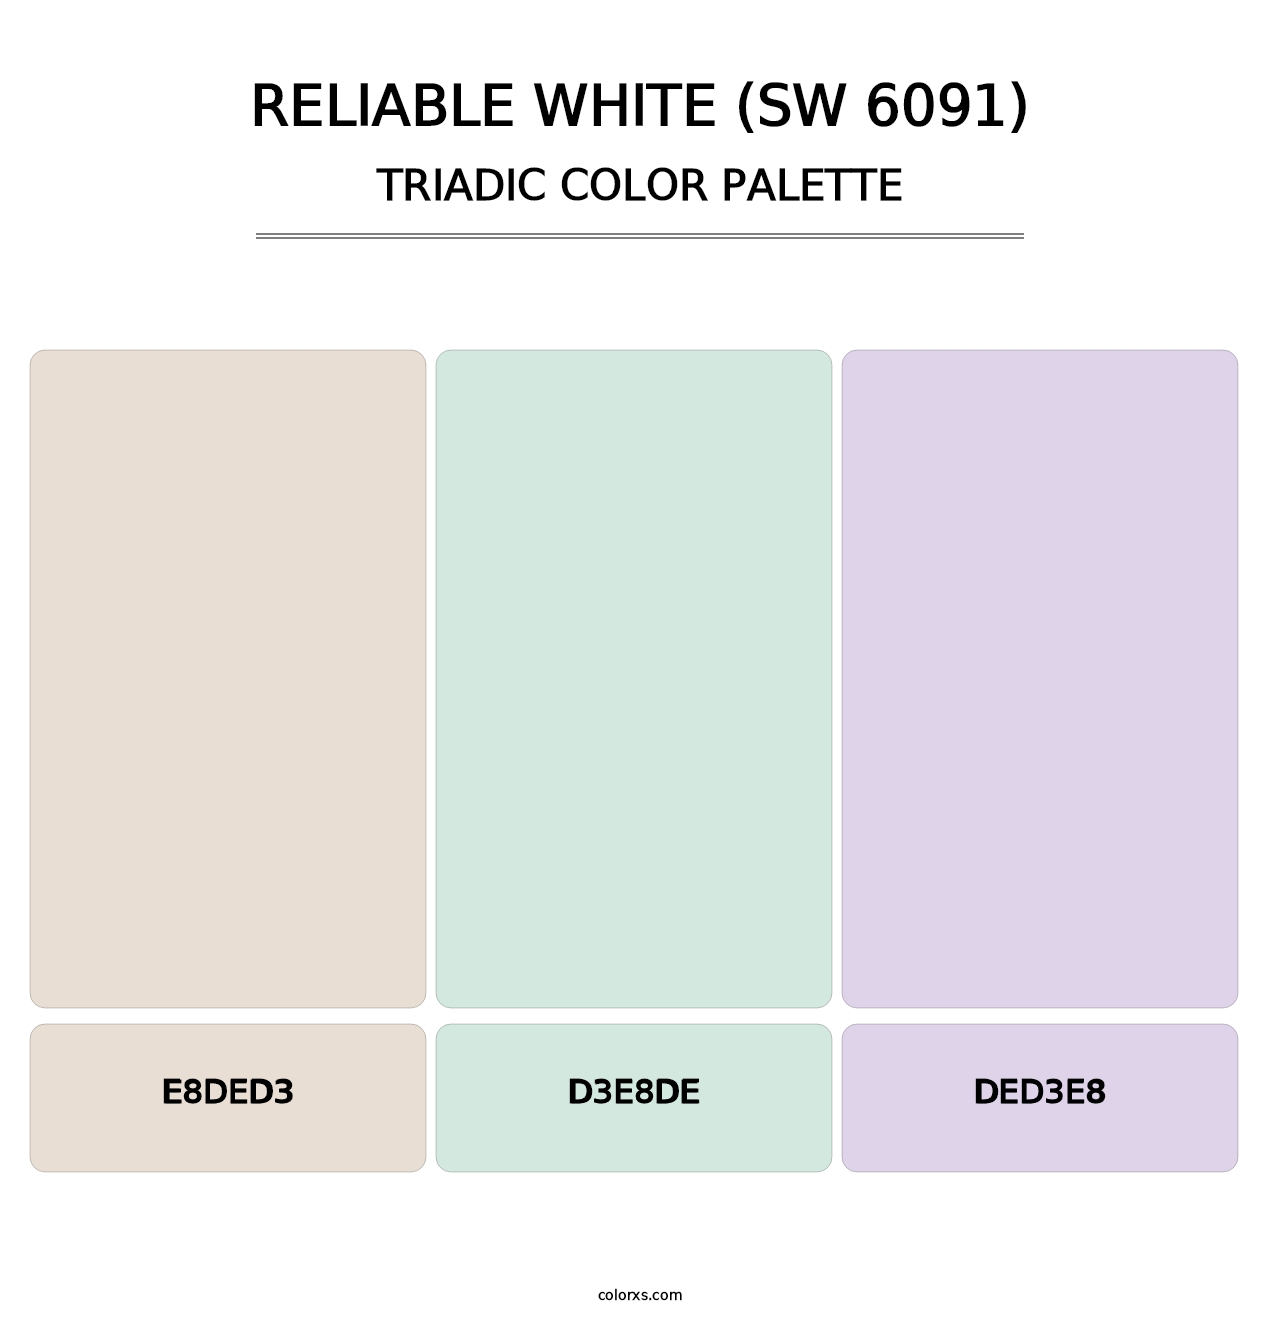 Reliable White (SW 6091) - Triadic Color Palette